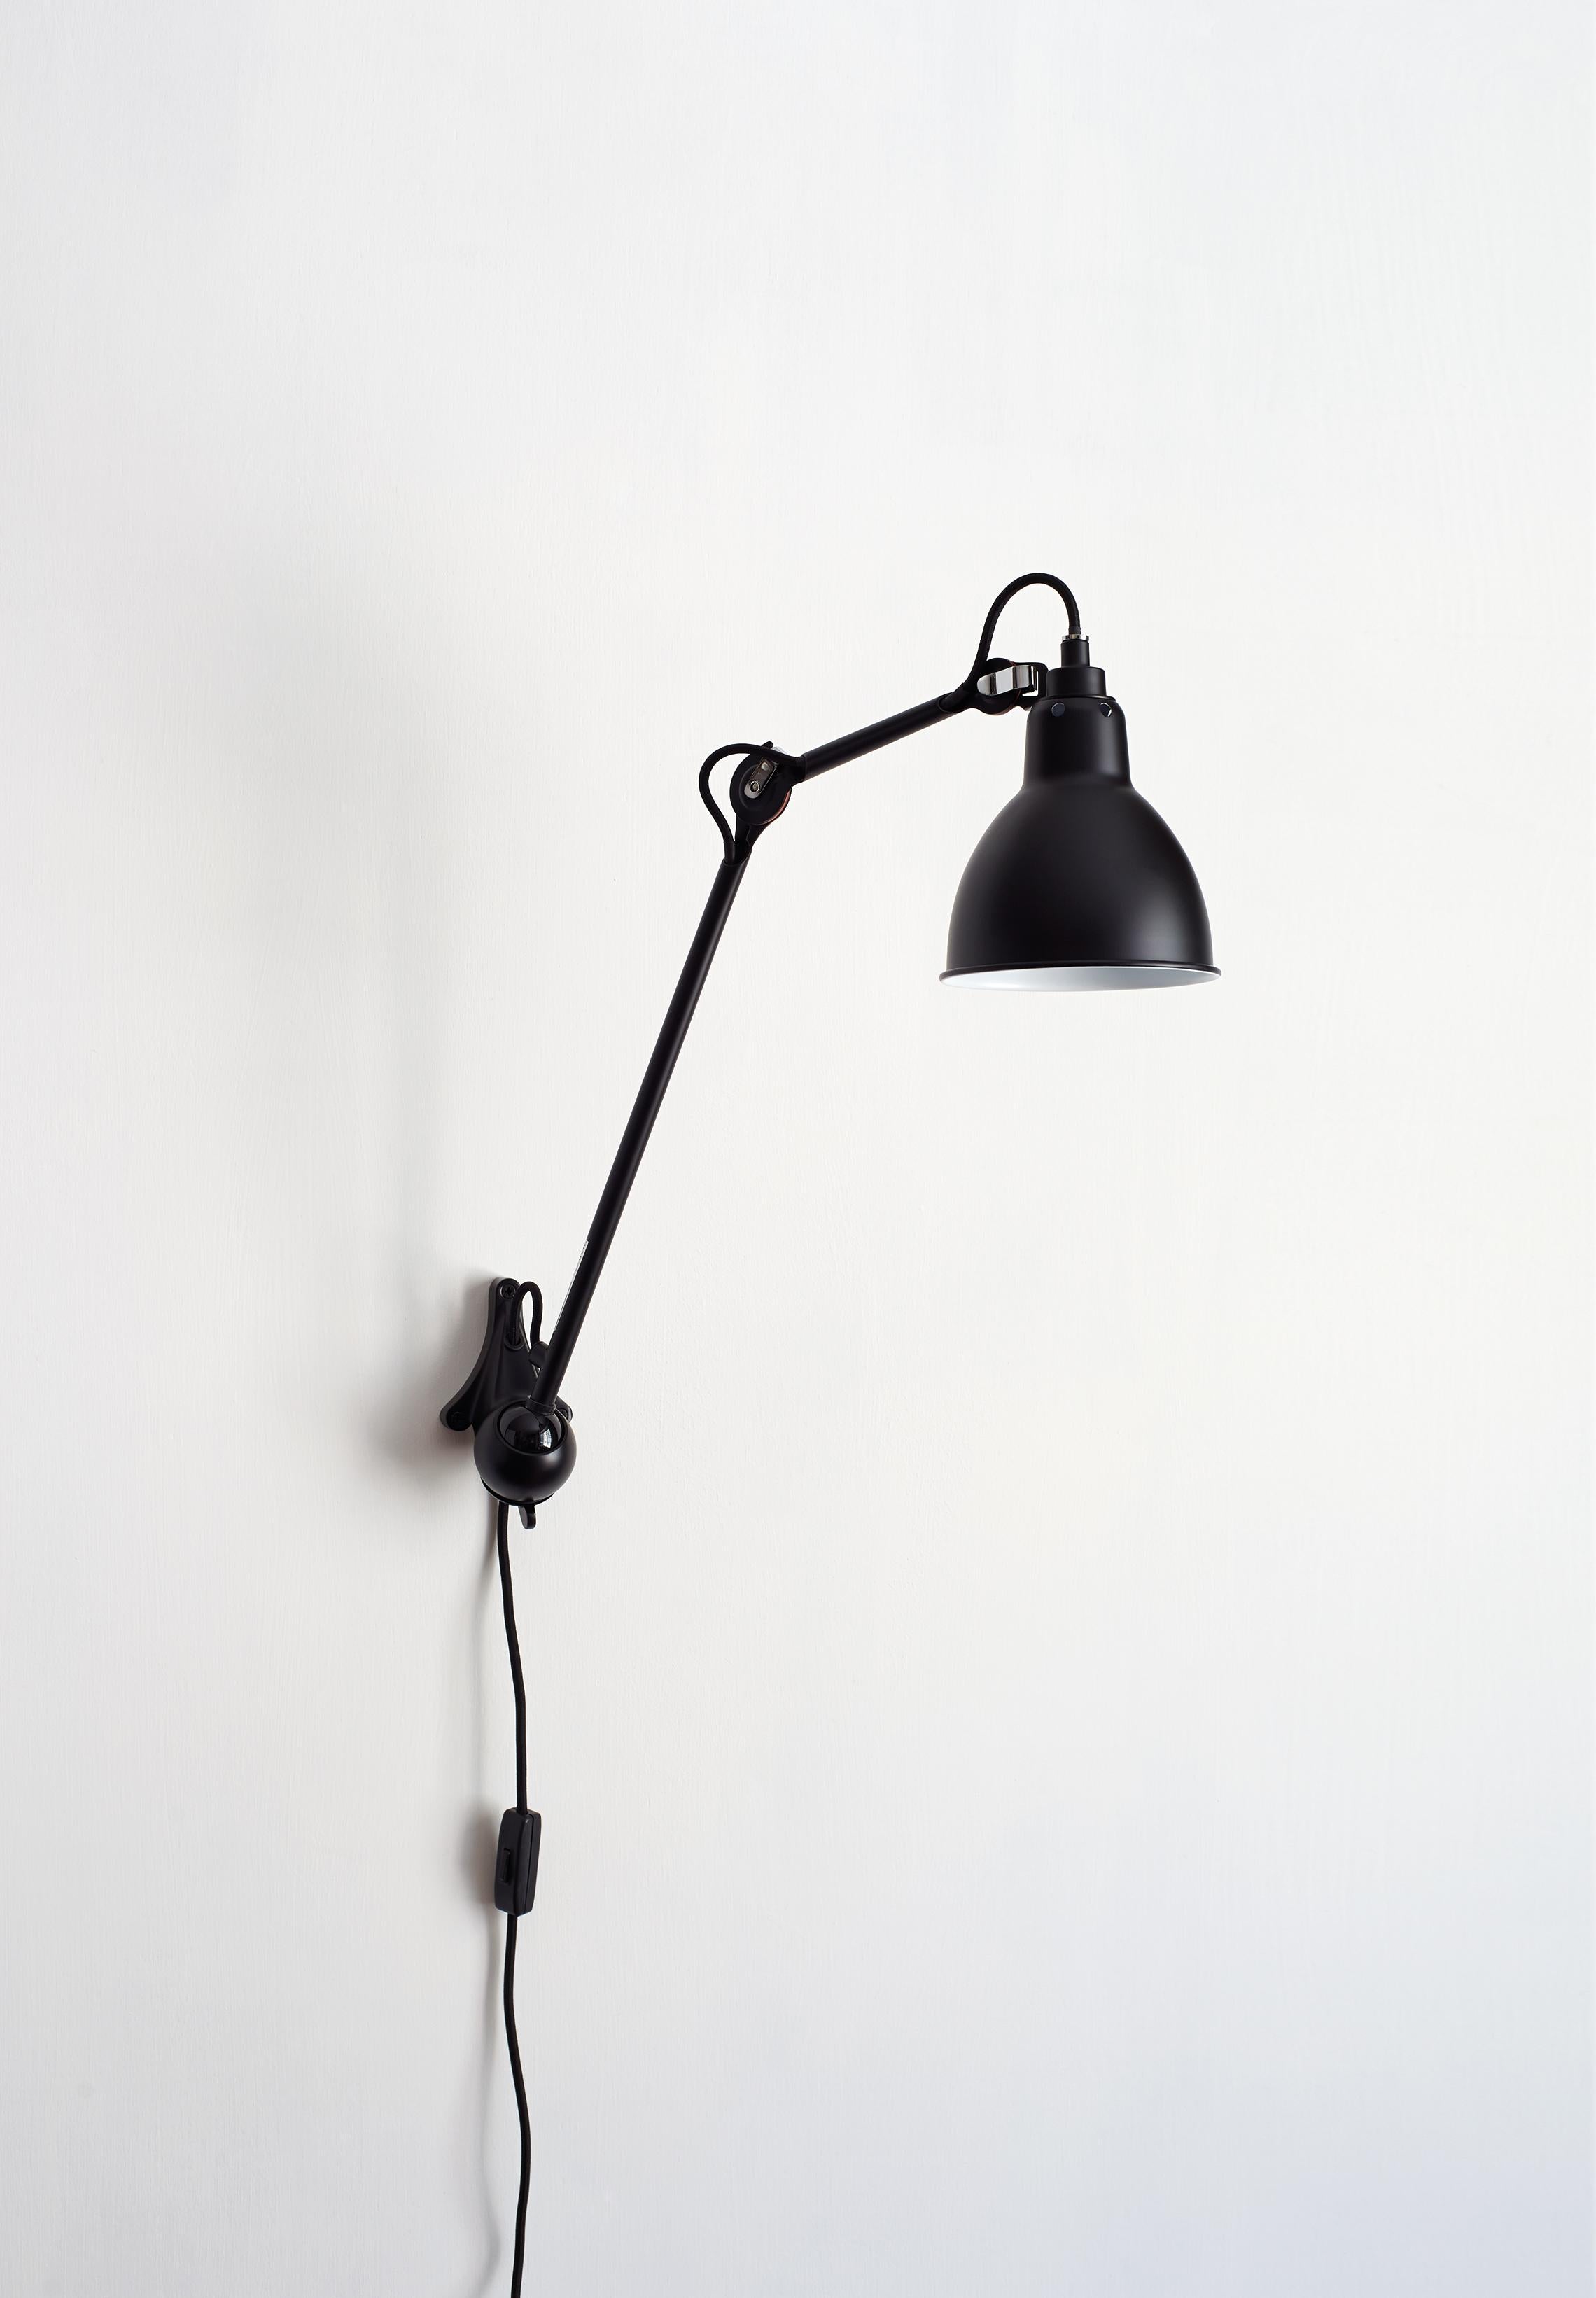 DCW Editions La Lampe Gras N°222 Wall Lamp in Black Steel Arm and Black Copper Shade by Bernard-Albin Gras
 
 In 1921 Bernard-Albin GRAS designed a series of lamps for use in offices and in industrial environments. The GRAS lamp, as it was